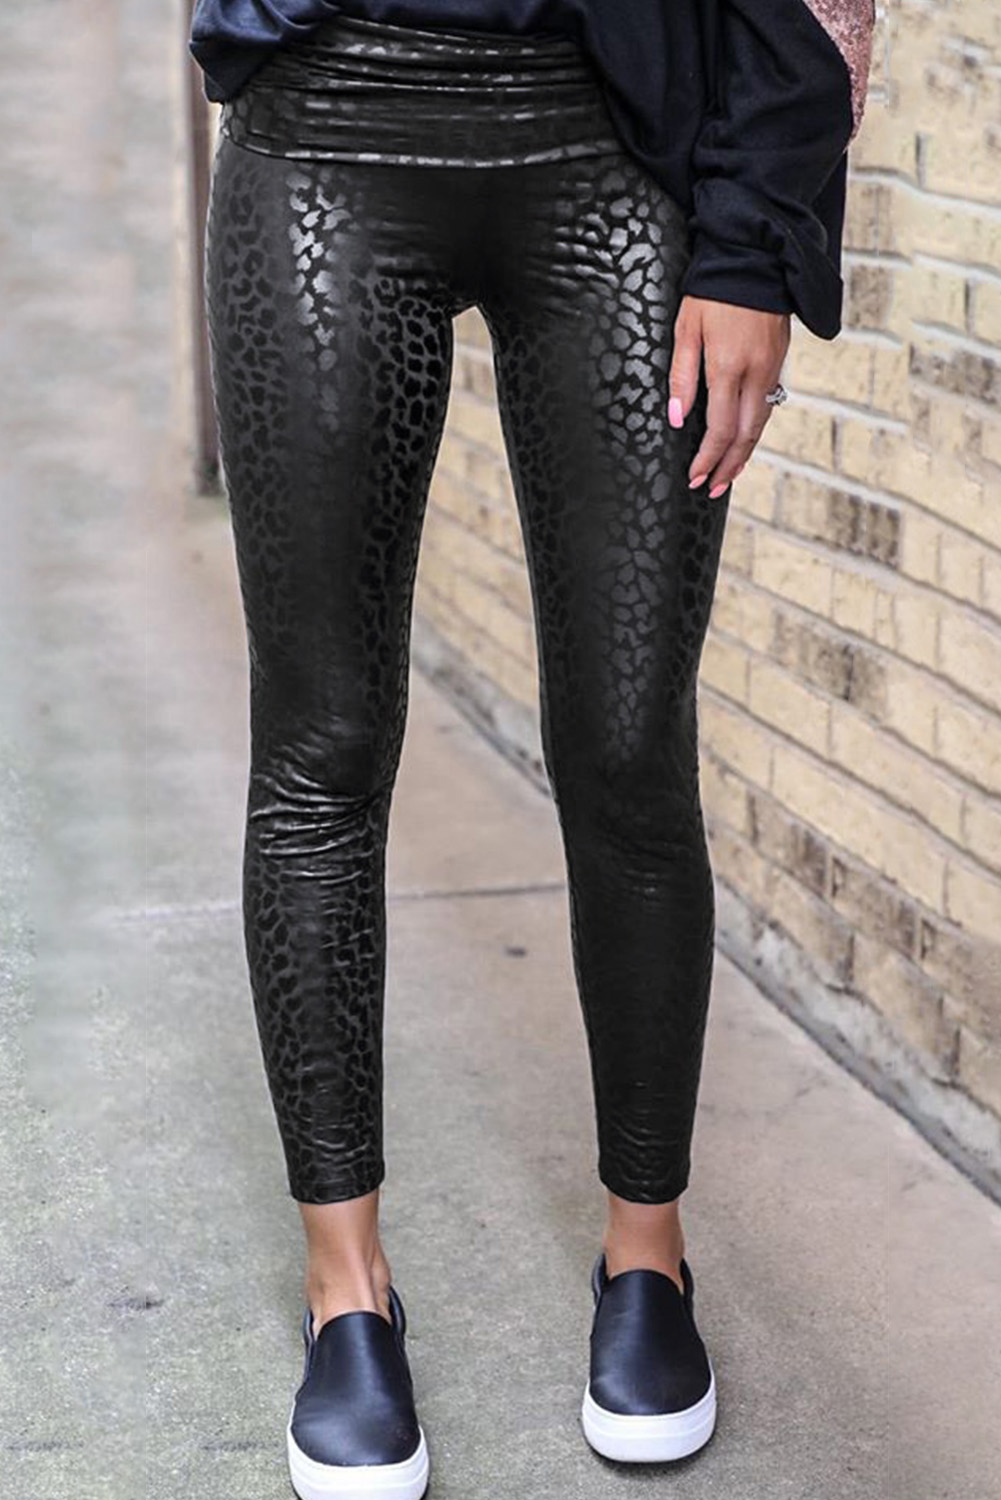 Shewin Wholesale Women Clothes Black Shiny Leopard Casual Textured LEGGINGS